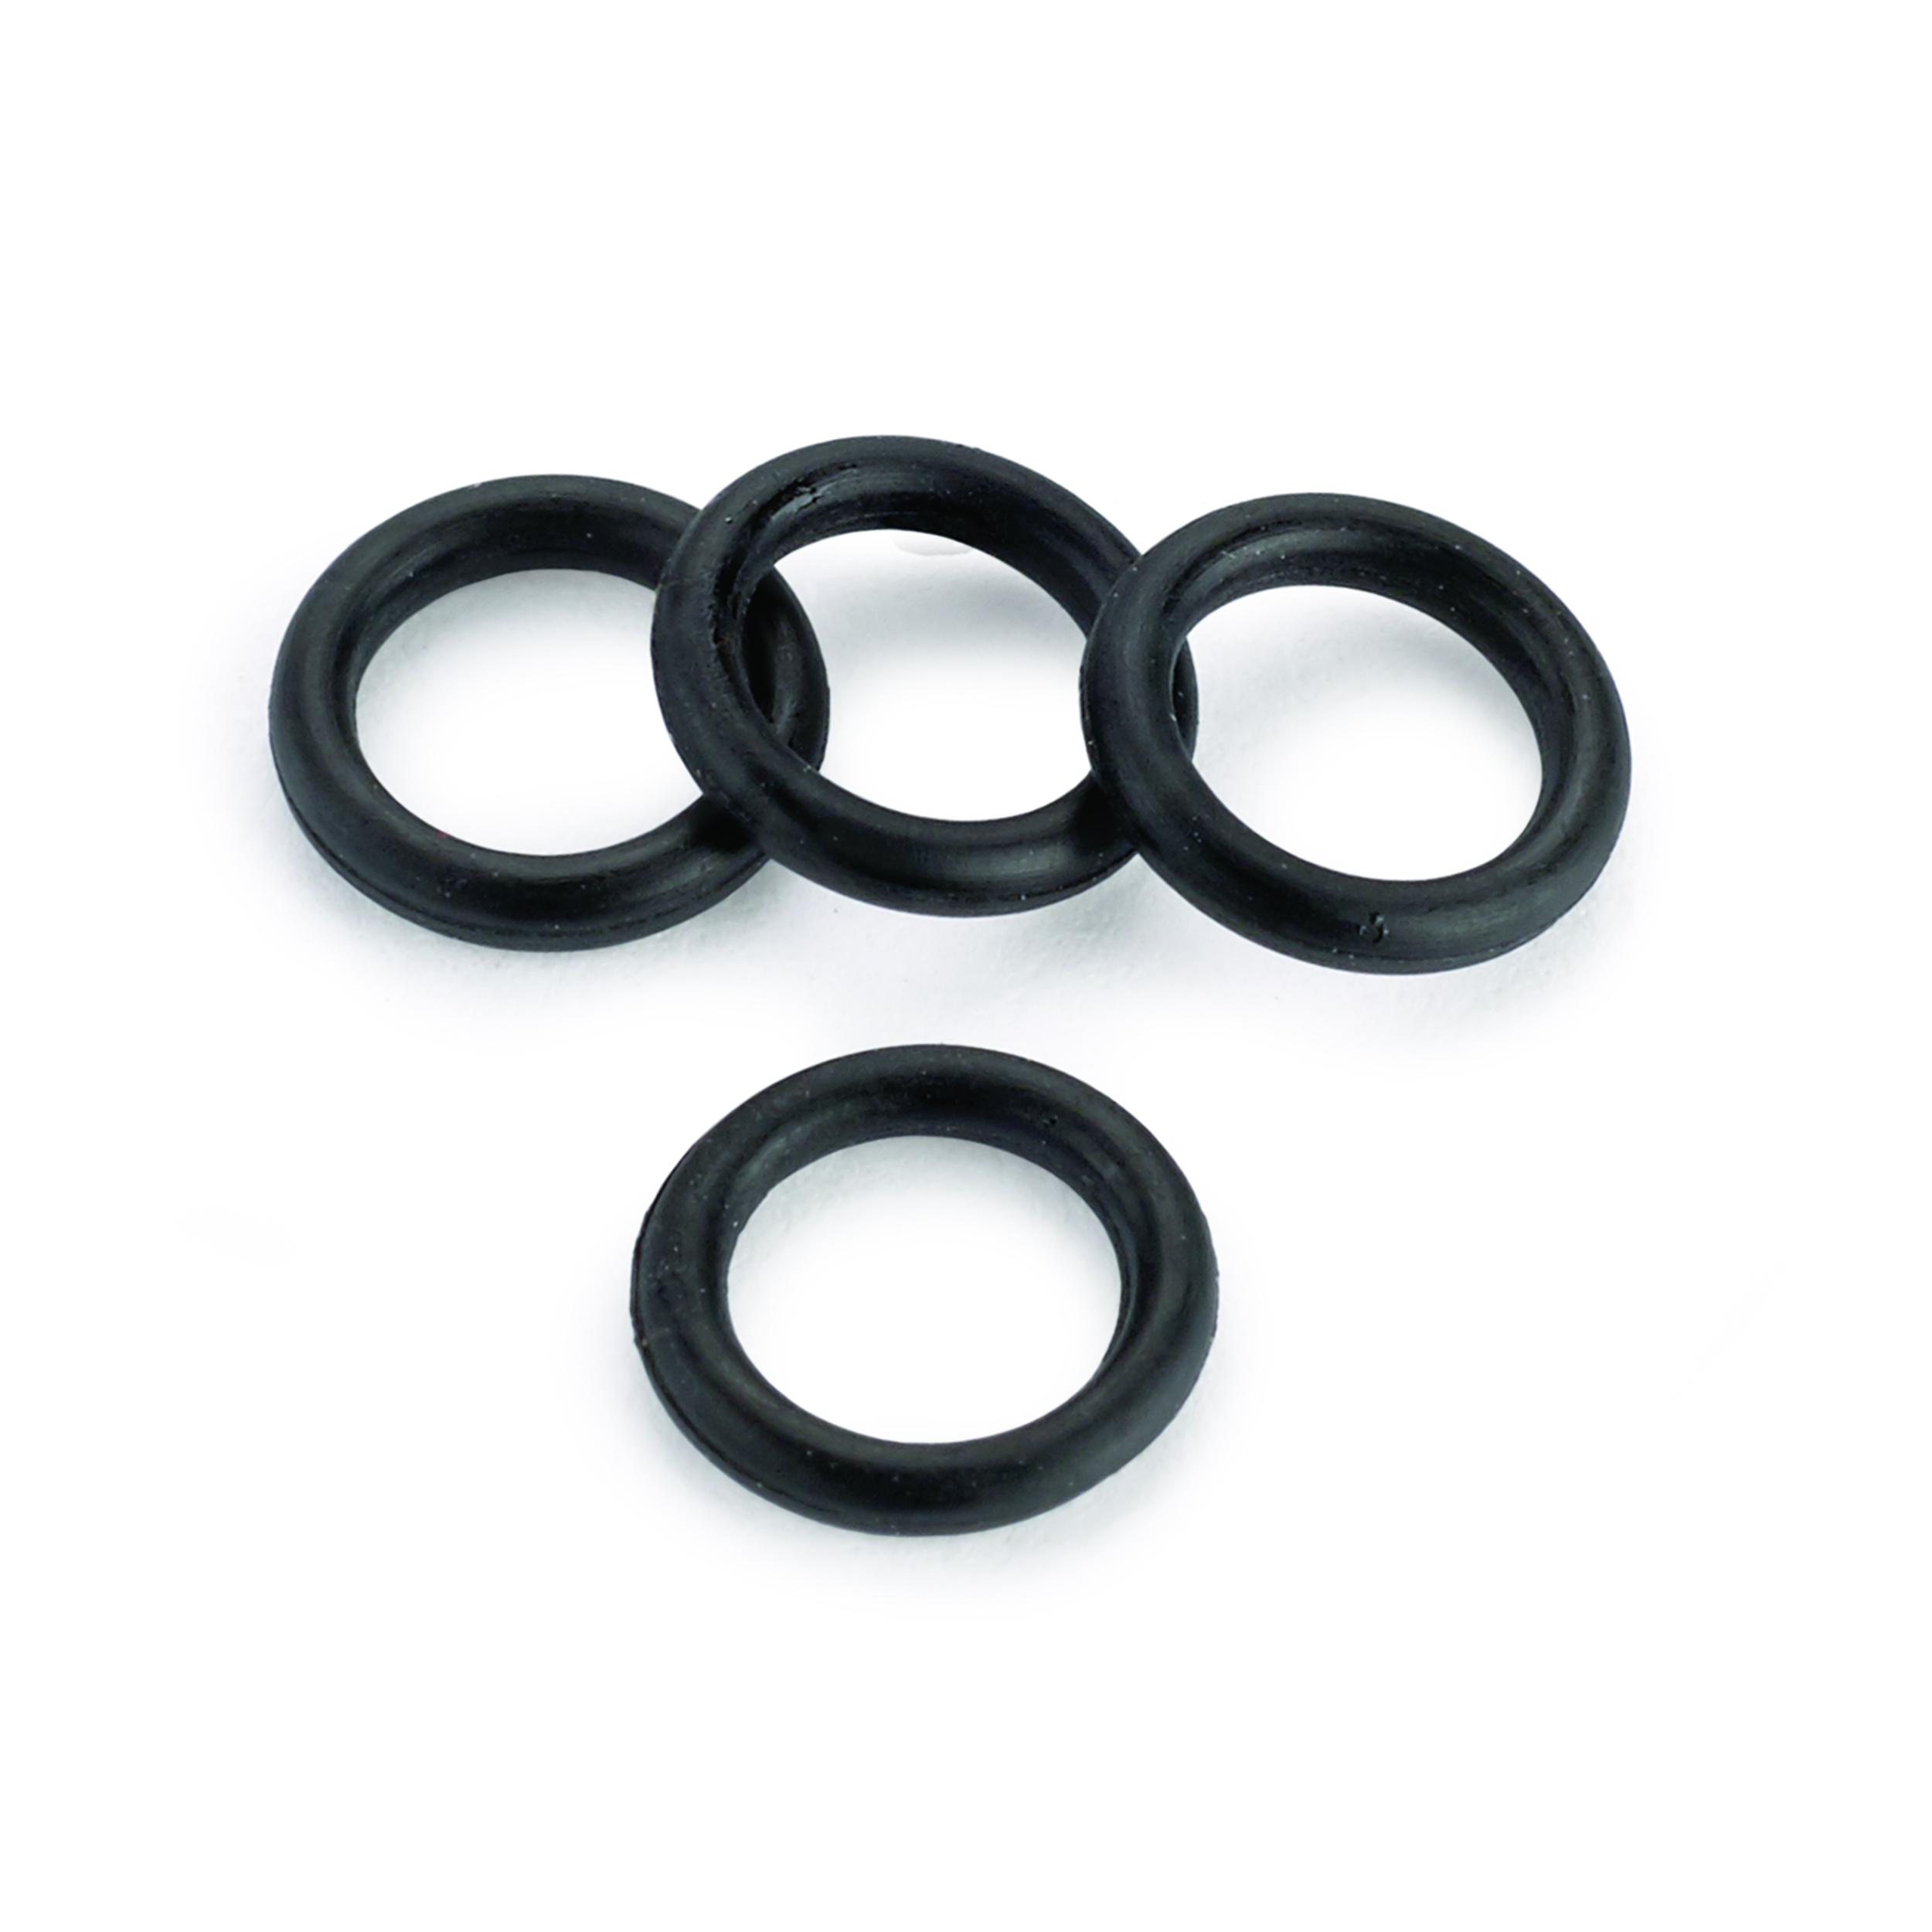 Replacement O-rings For Seam Ripper Turning Kits